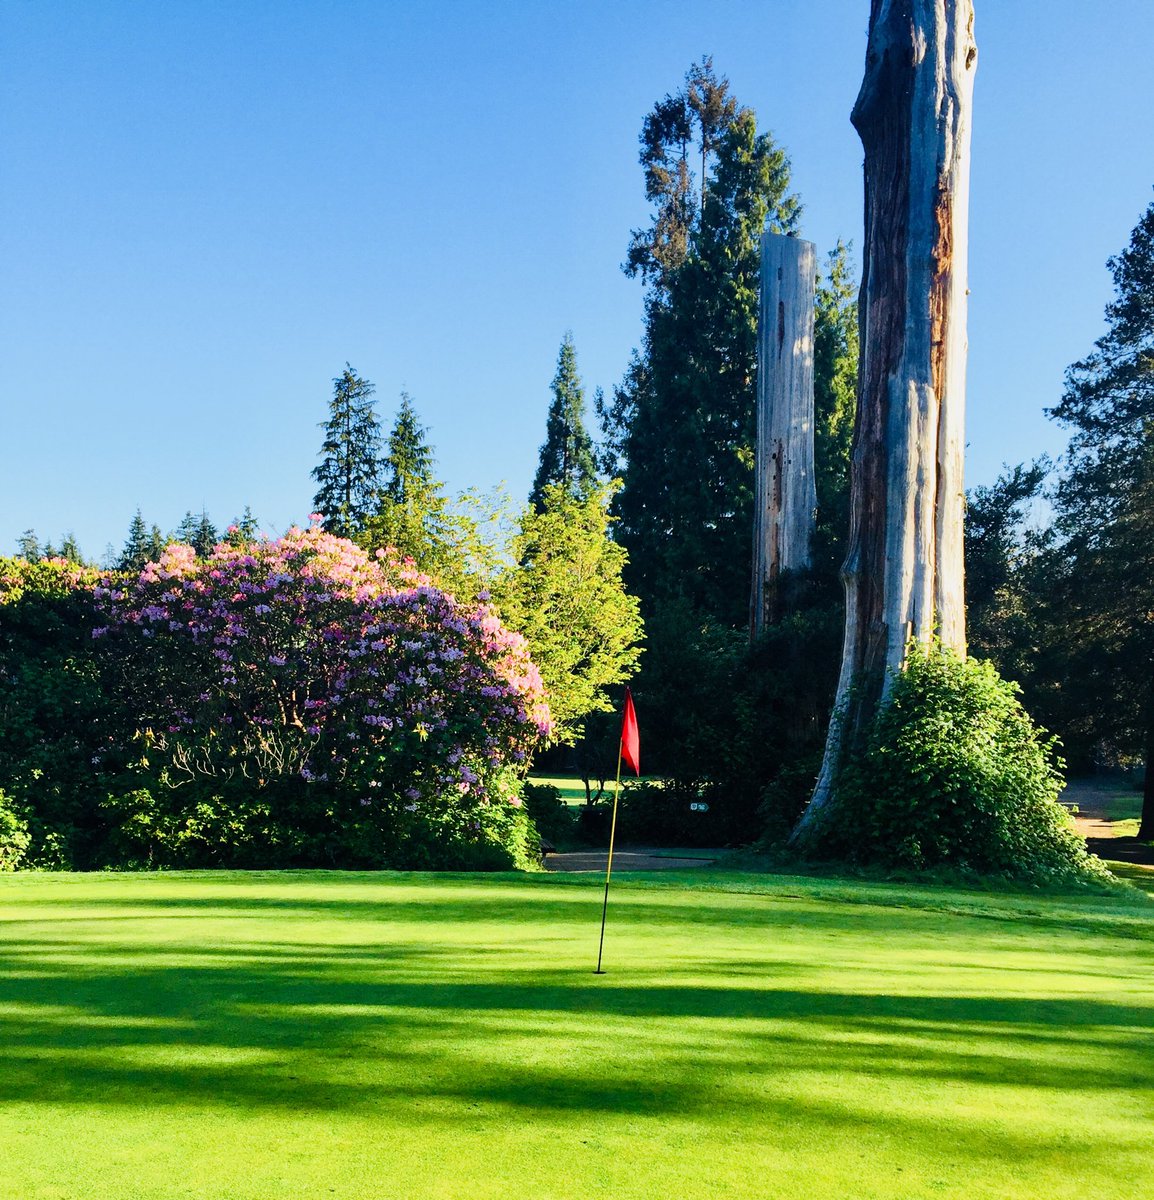 Stanley Park Pitch and Putt golf course in Stanley Park, Vancouver, BC, Canada